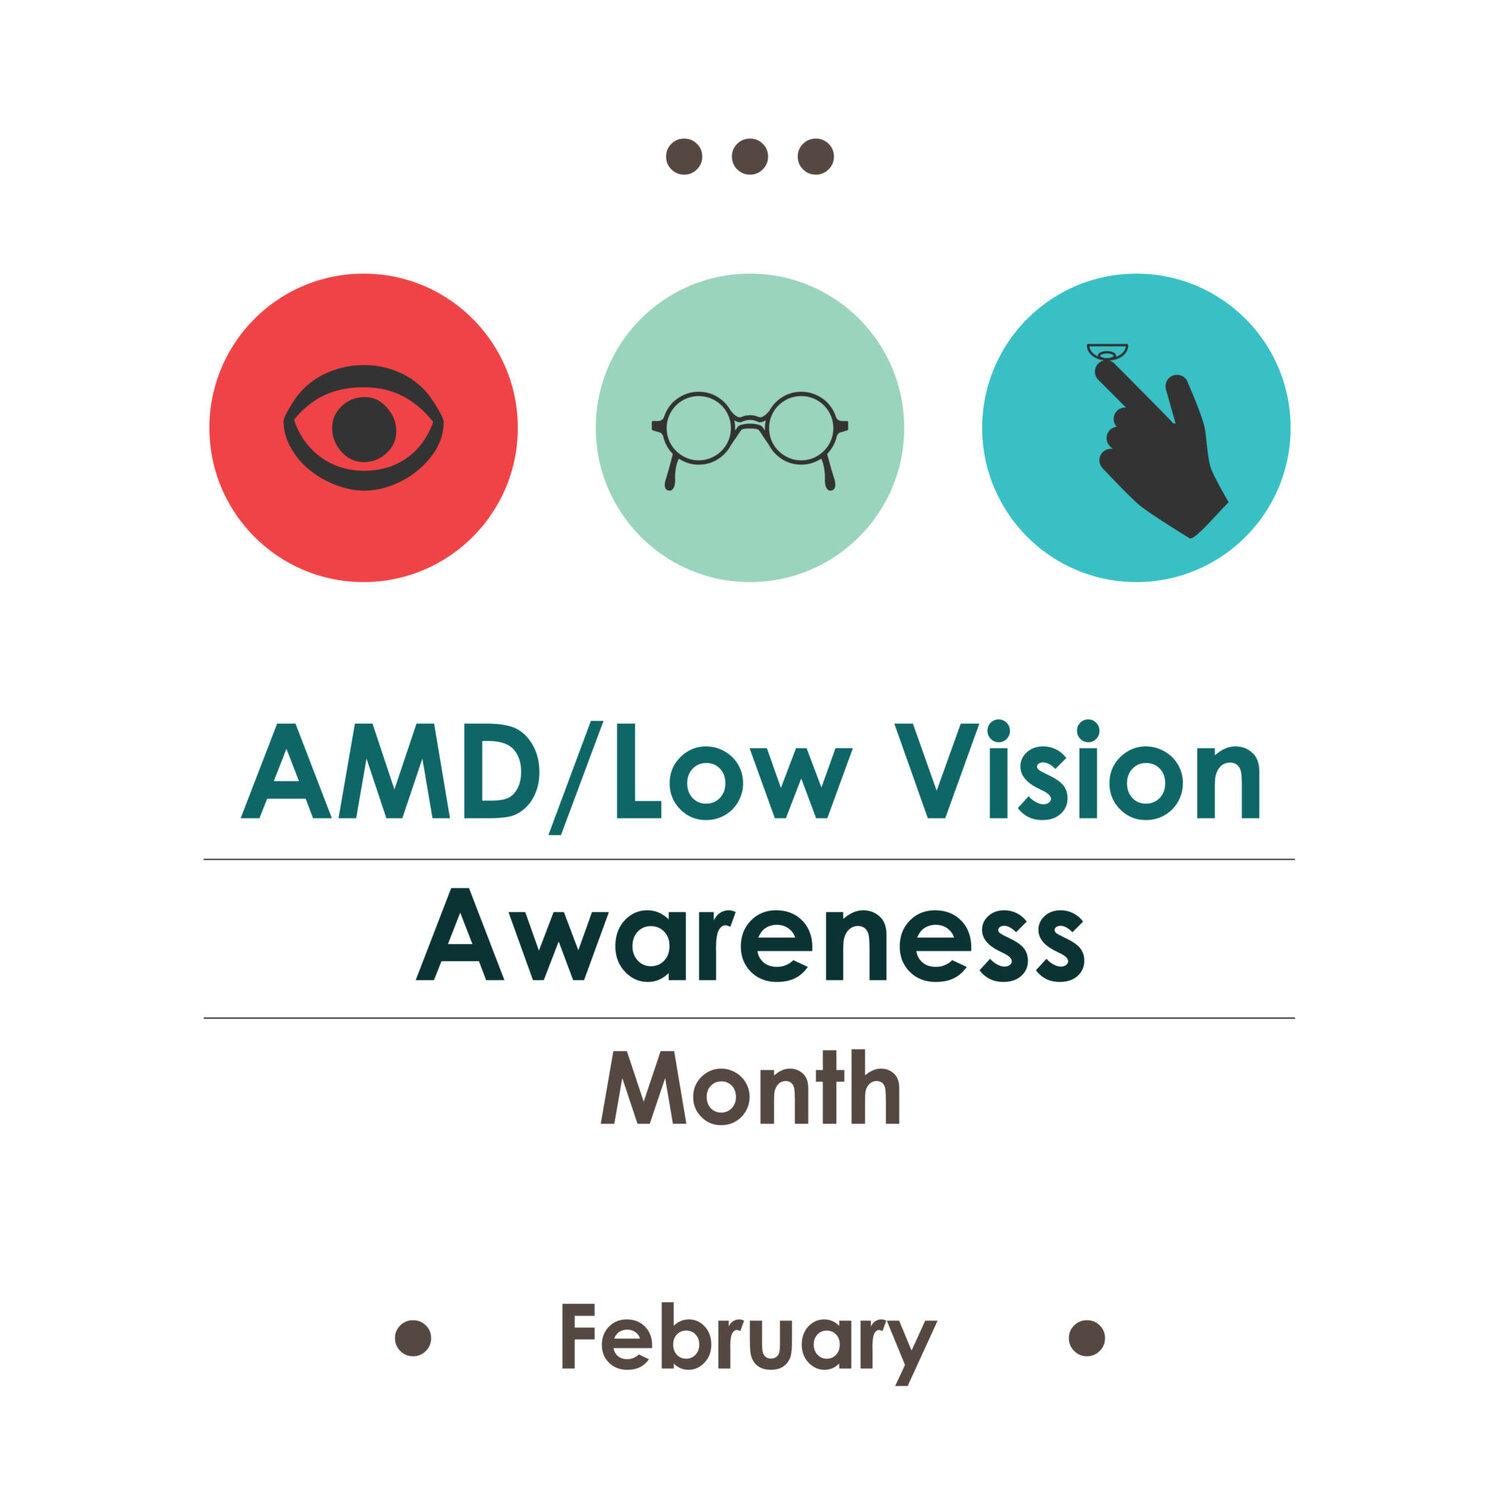 AWD/Low Vision Awareness Month (February)